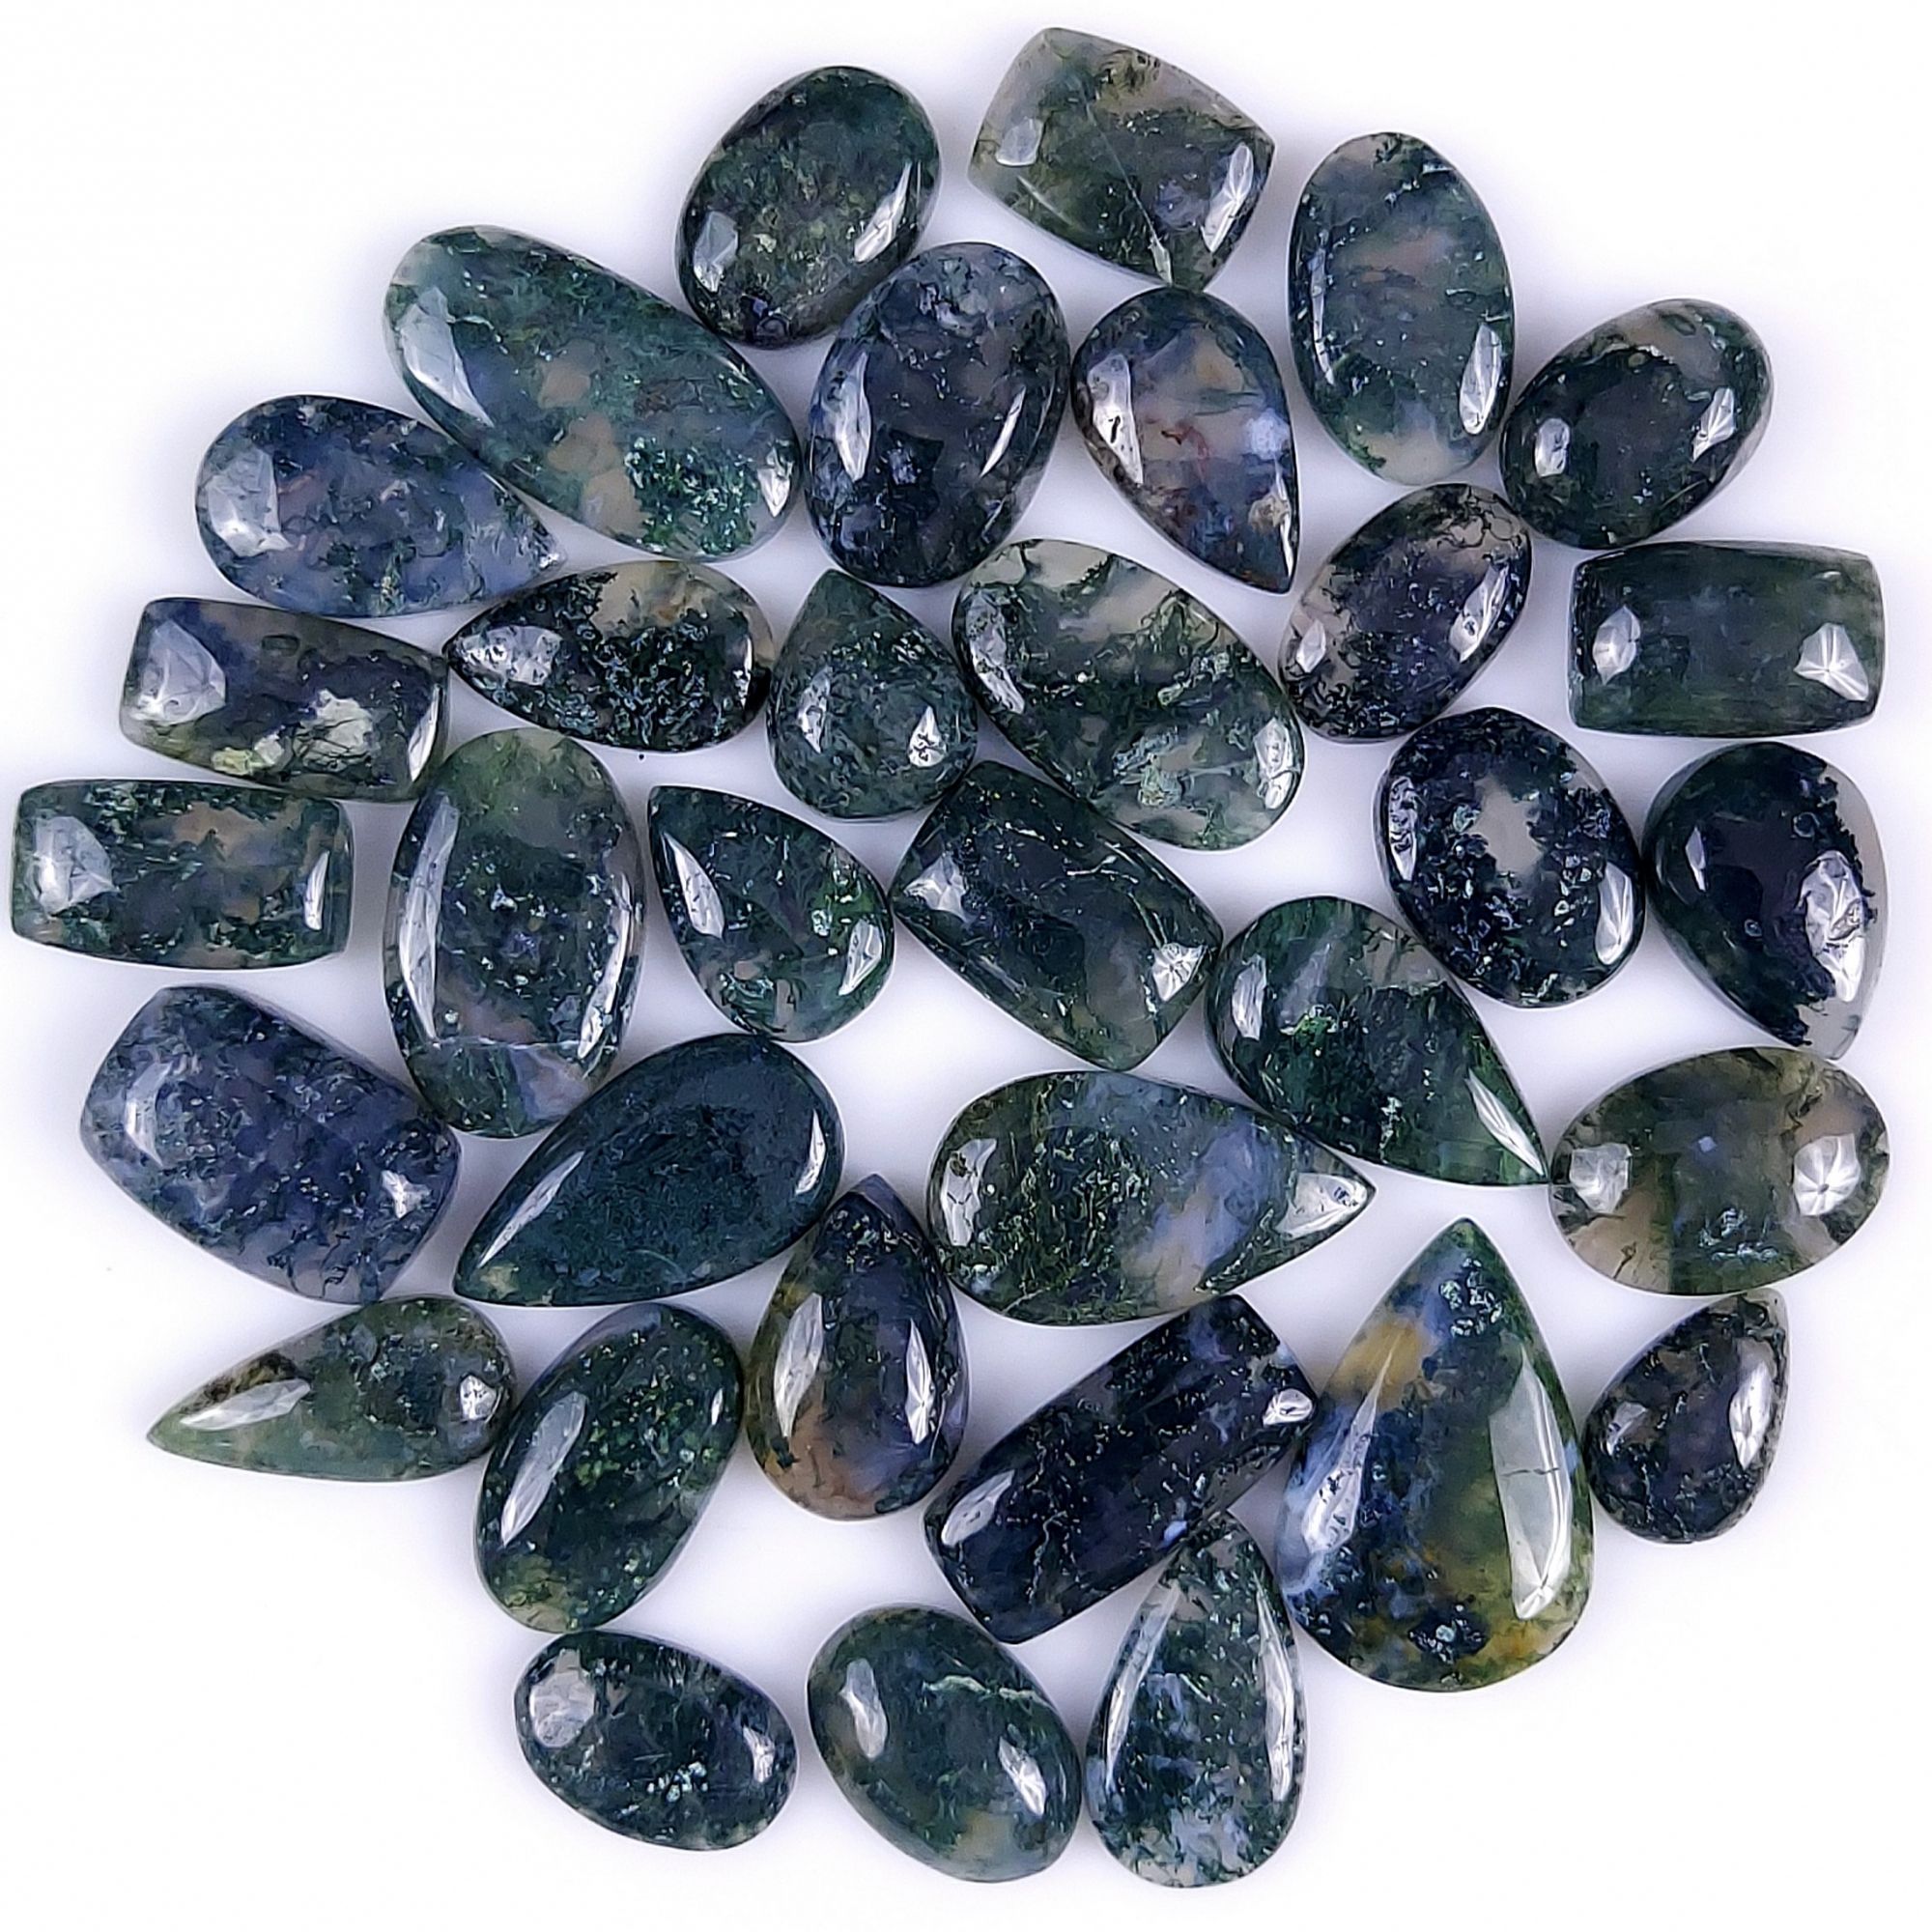 34Pcs 204Cts Natural Green Moss Agate Cabochon Lots Mixed Shapes And Sizes Moss Agate loose gemstone Cabochon Wholesale Lot 18x12 10x6mm#G-366